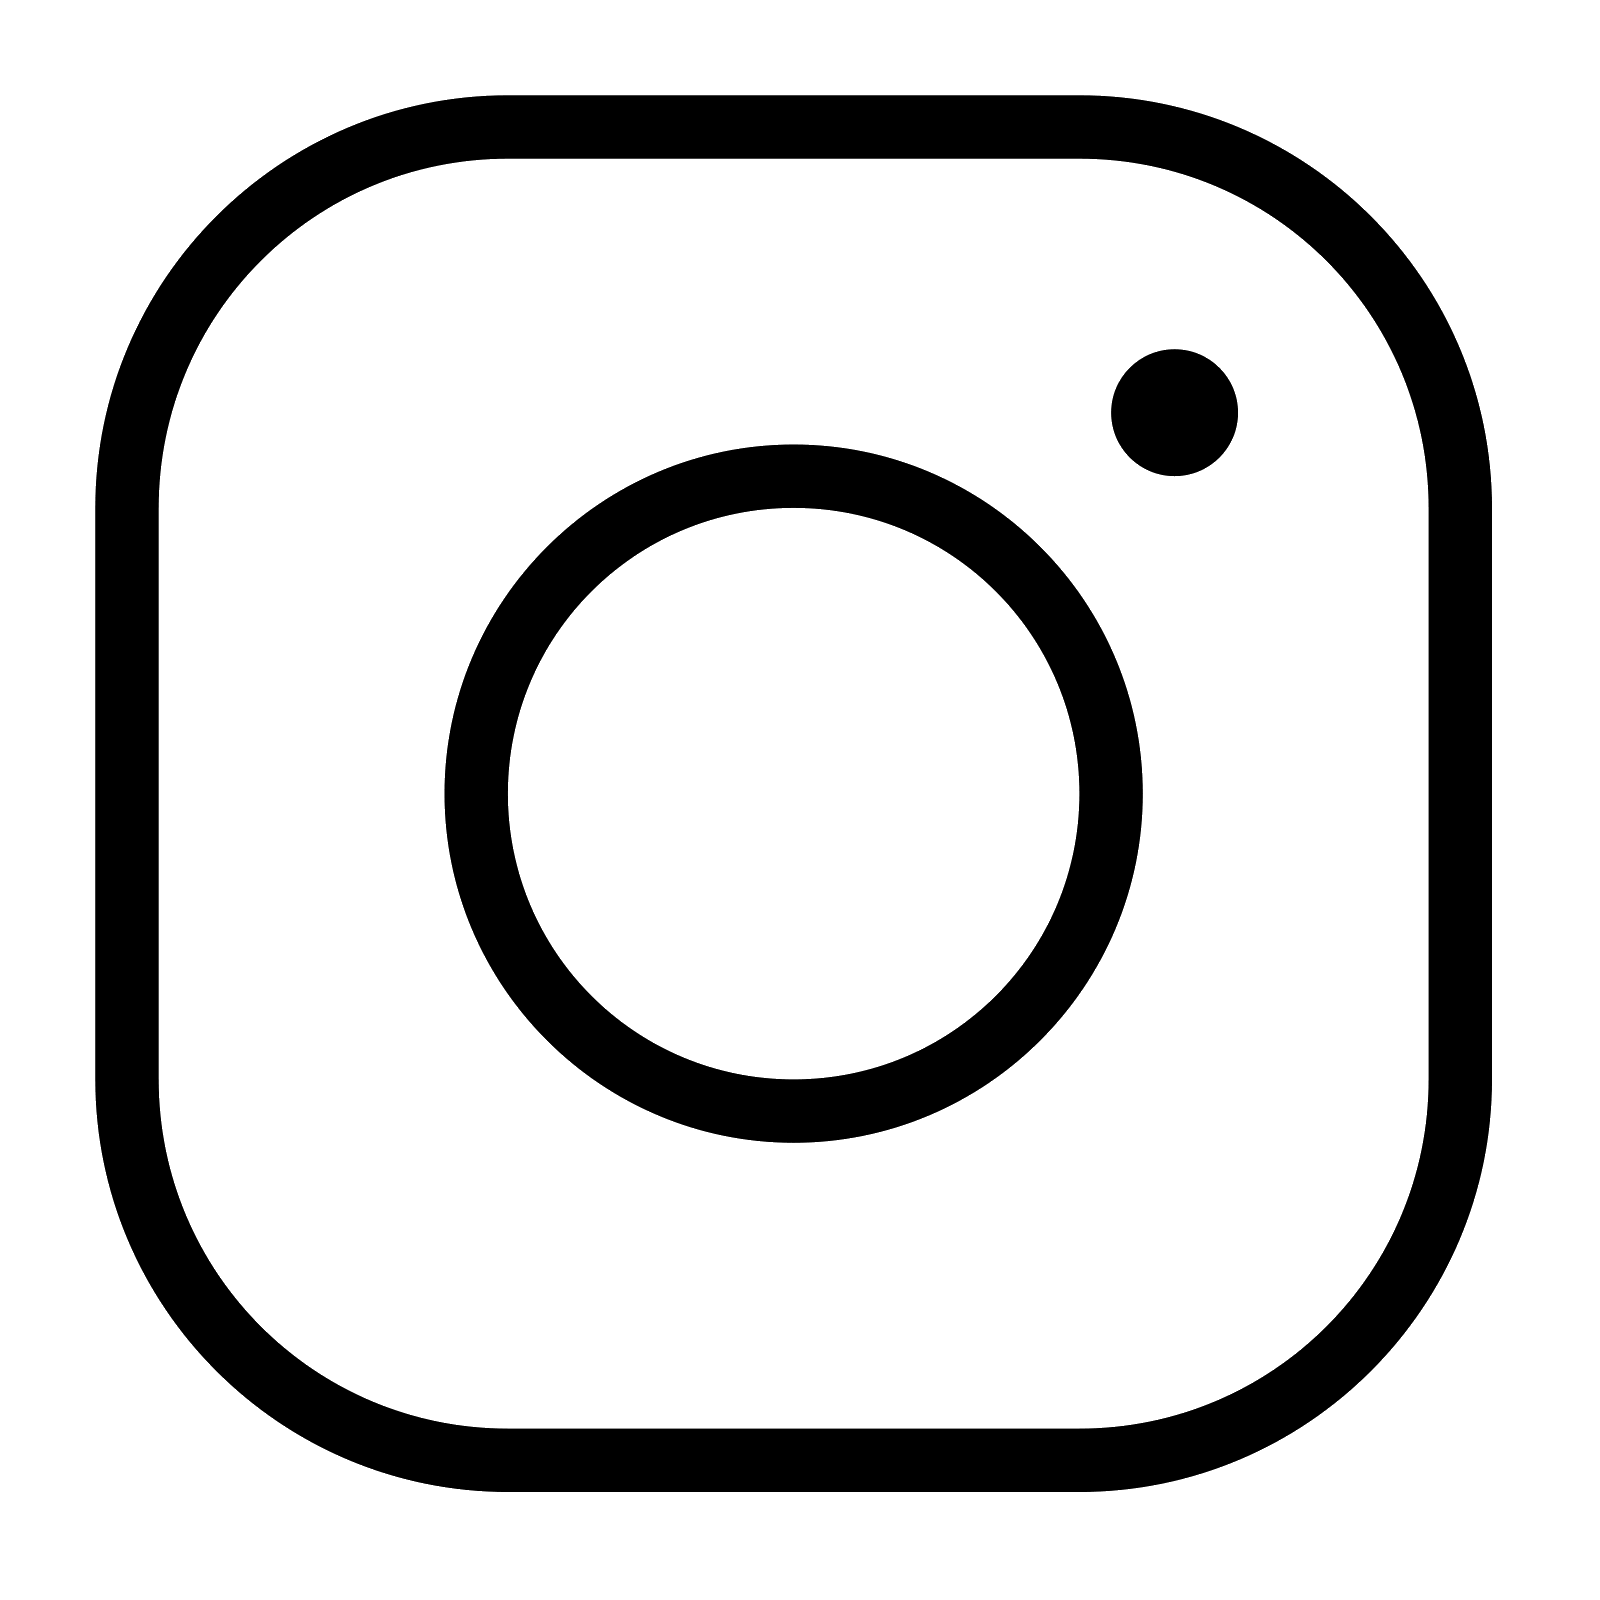 Instagtram Logo - Free Instagram Icon Black And White Png 88035 | Download Instagram ...